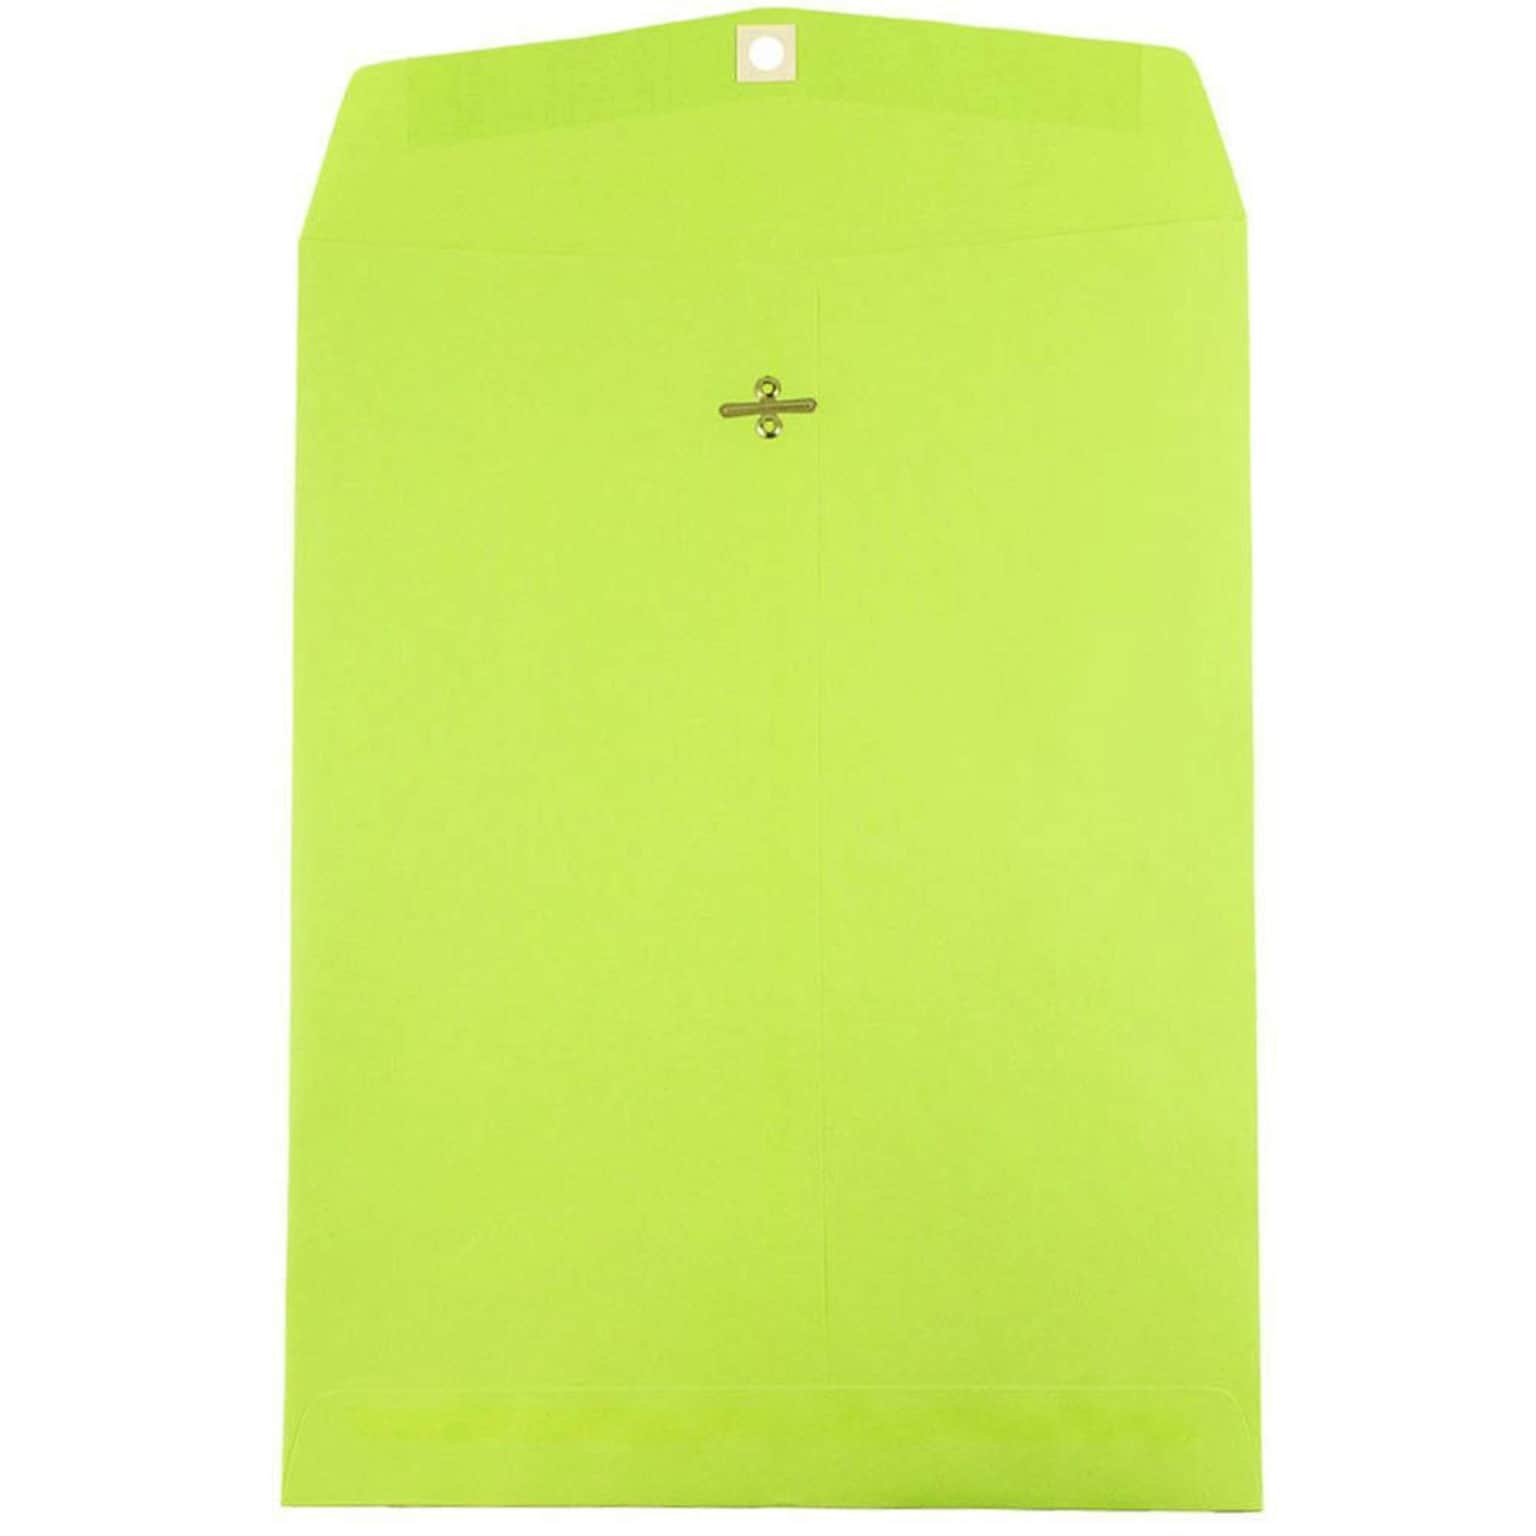 JAM Paper 10 x 13 Open End Catalog Colored Envelopes with Clasp Closure, Ultra Lime Green, 10/Pack (V0128186B)